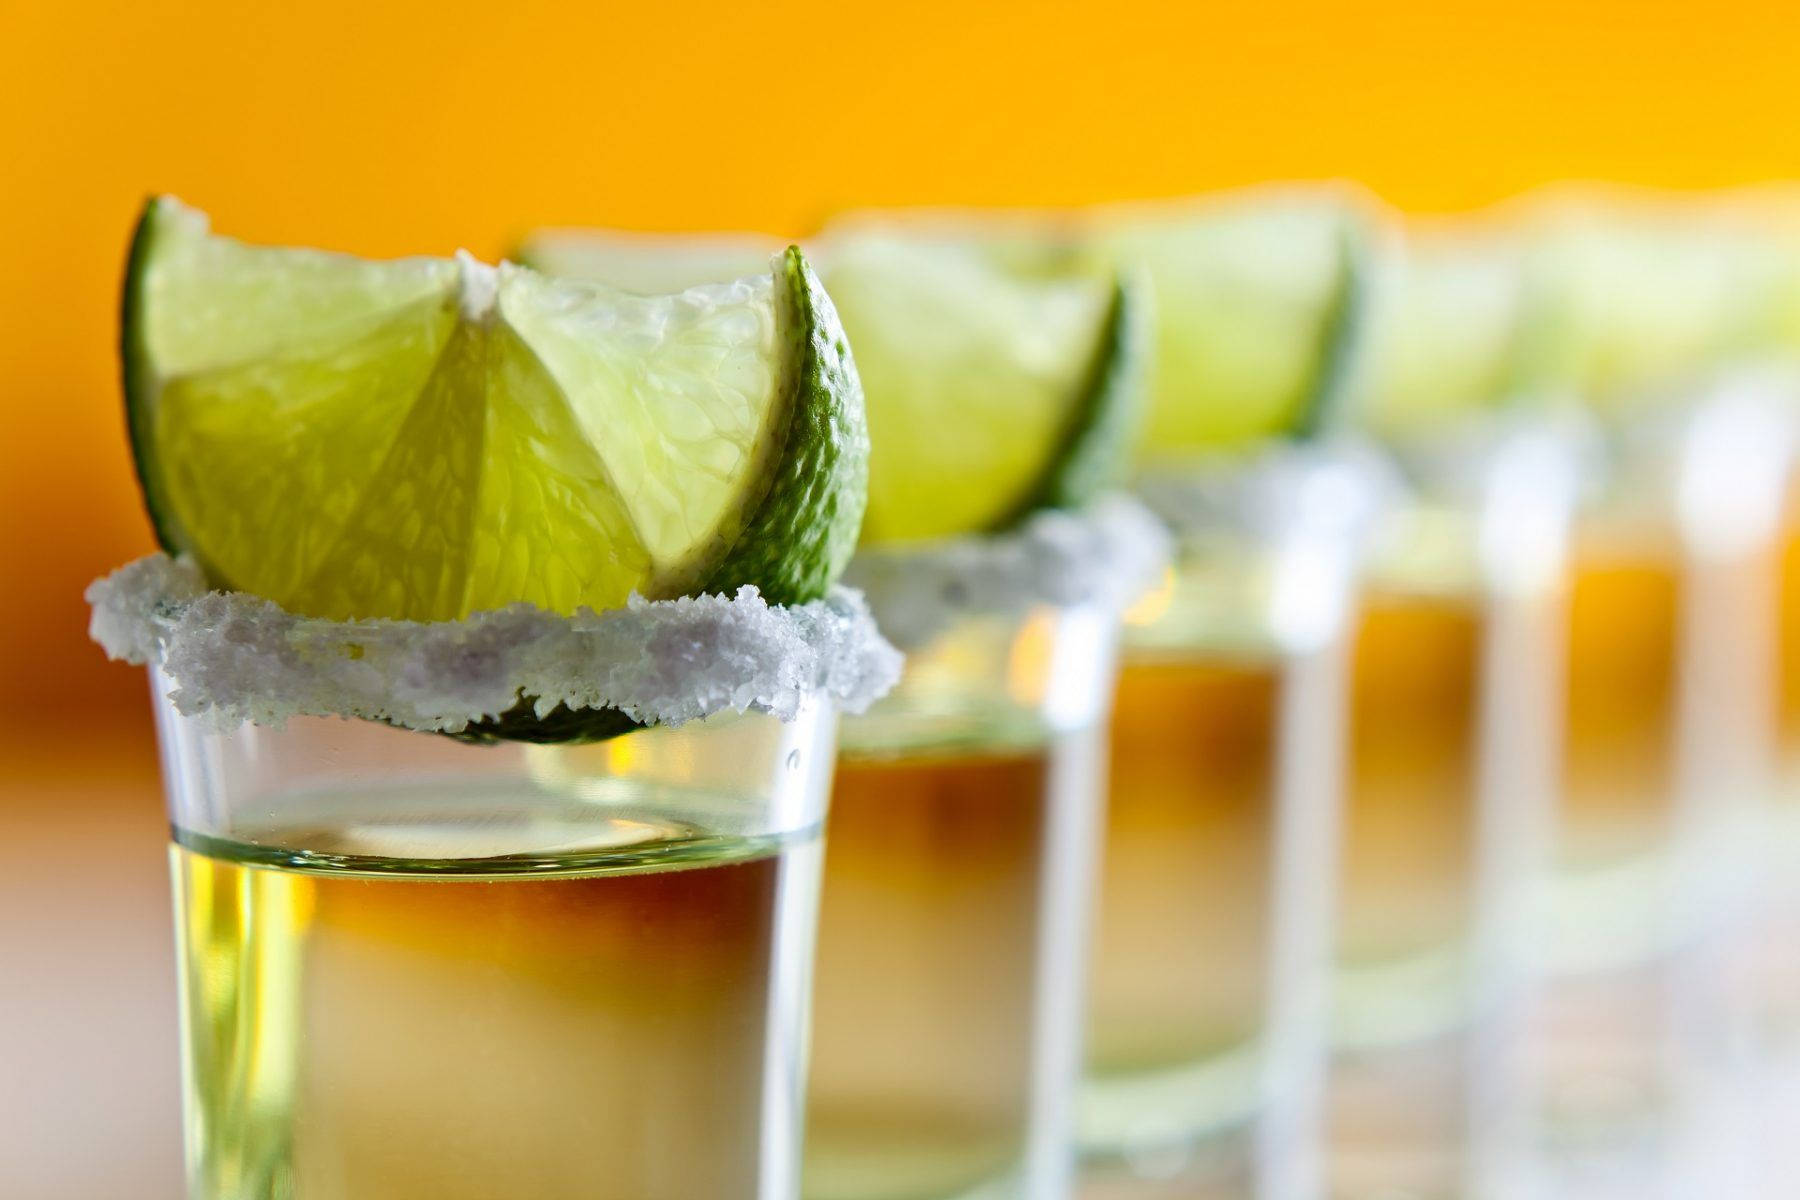 Caption: A Vibrant Showcase of Tequila Shots with Lime Garnish Wallpaper